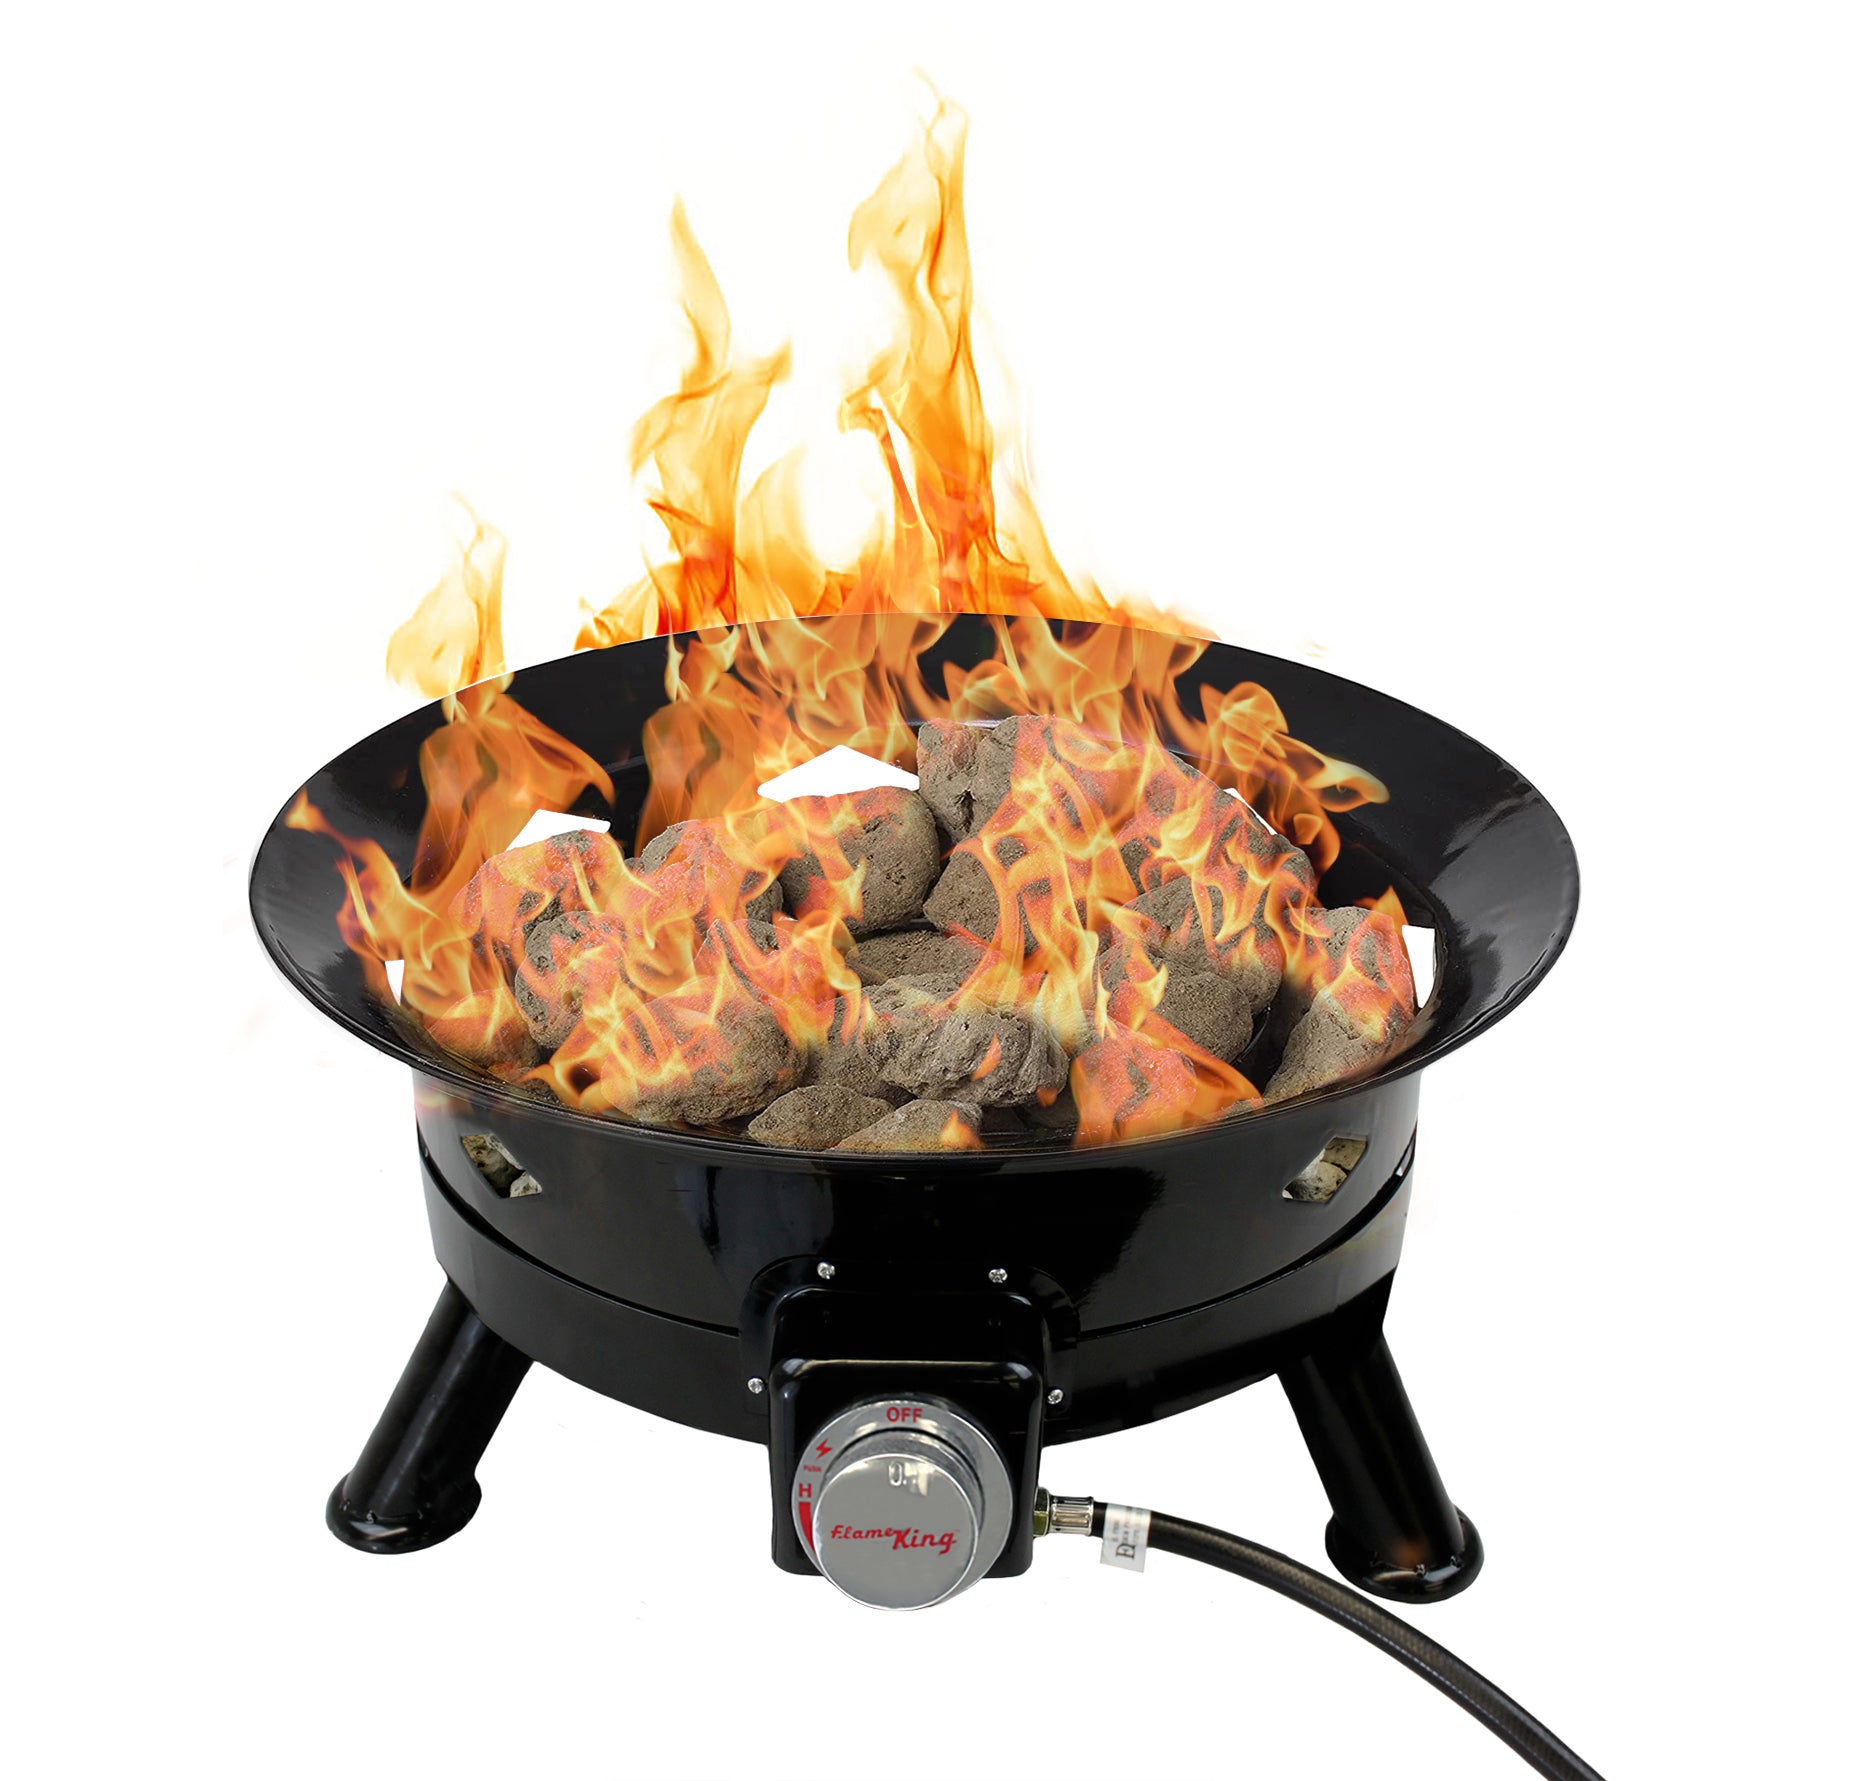 Flame King Outdoor Portable Propane Gas 24″ Fire Pit Bowl with Self Igniter Cover Carry Straps